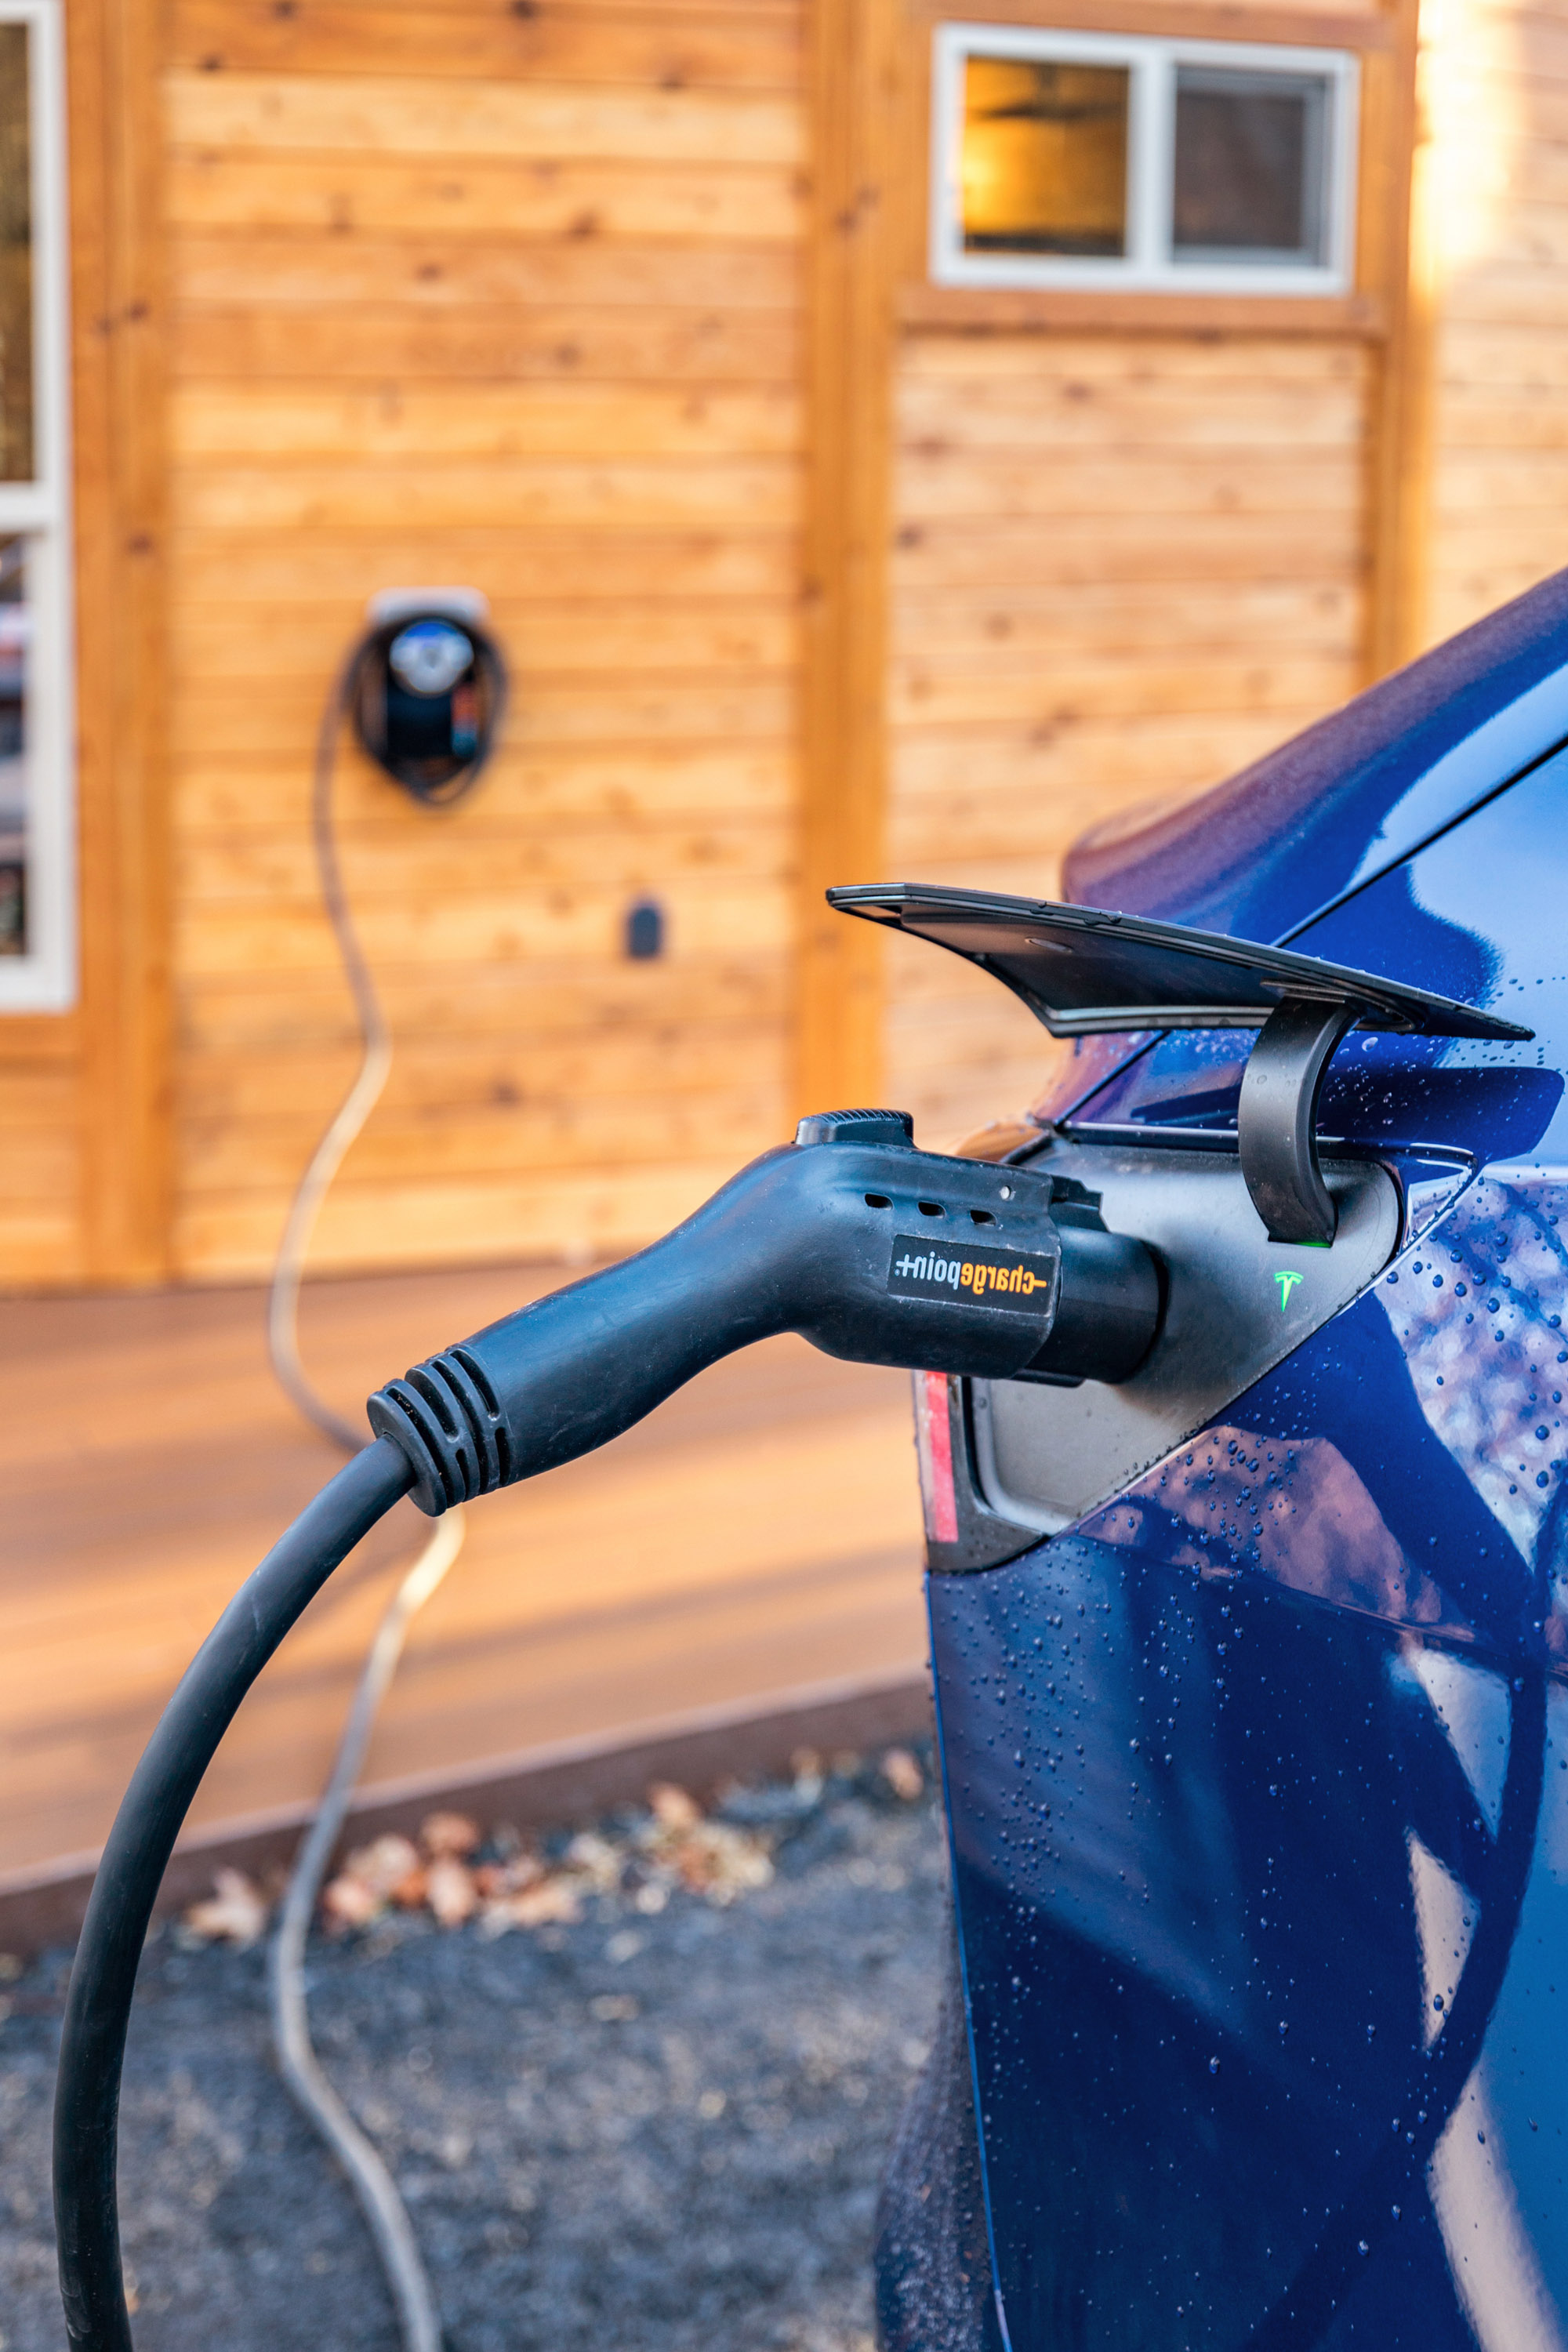 <span  class="uc_style_uc_tiles_grid_image_elementor_uc_items_attribute_title" style="color:#ffffff;">Fast Level 2 EV charger. We are getting 30-40mi per hour.</span>